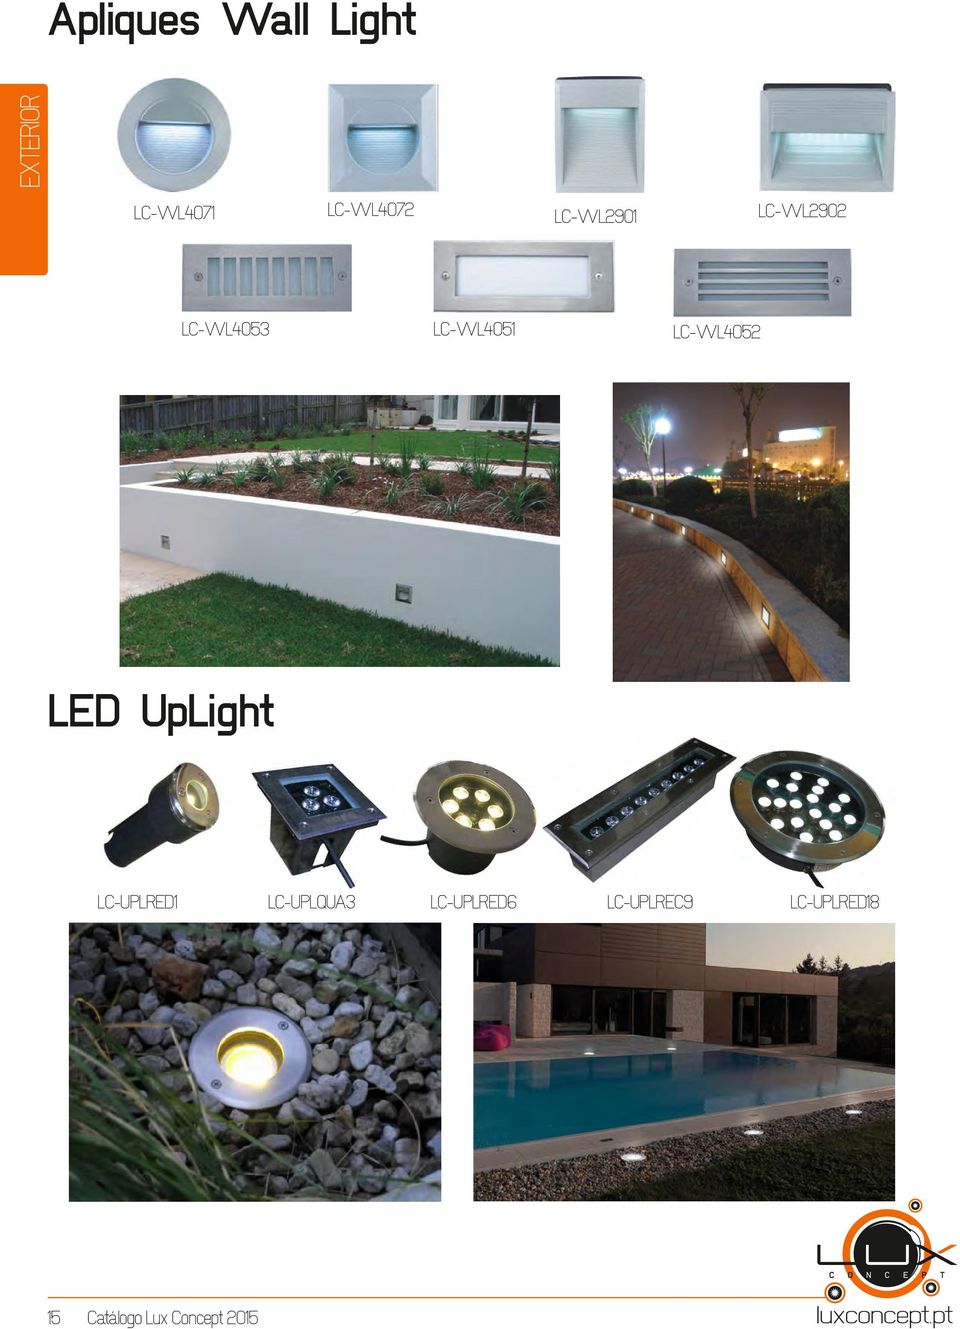 LC-WL4051 LC-WL4052 LED UpLight LC-UPLRED1